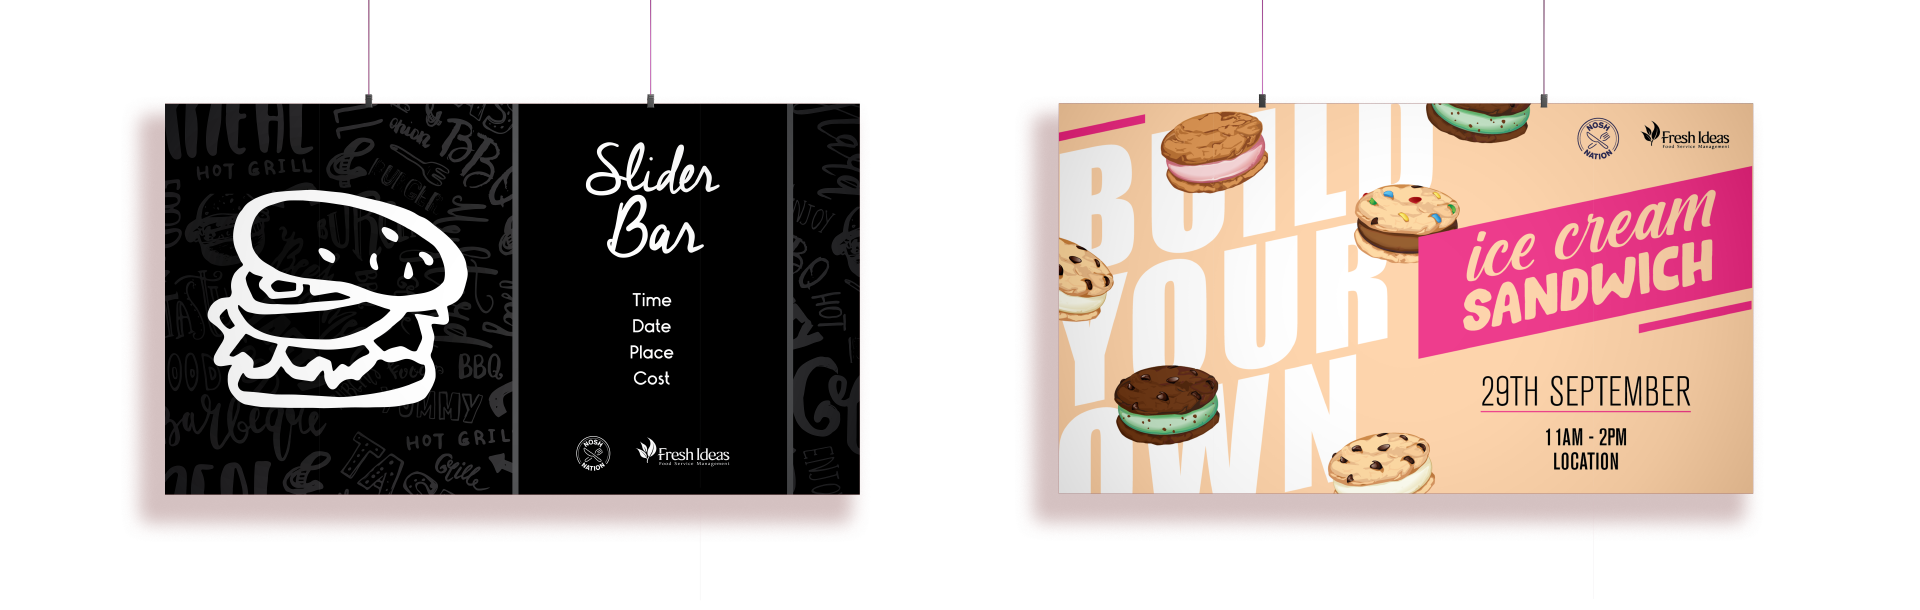 2 horizontal posters advertising a sliders and a build your own ice cream sandwich event